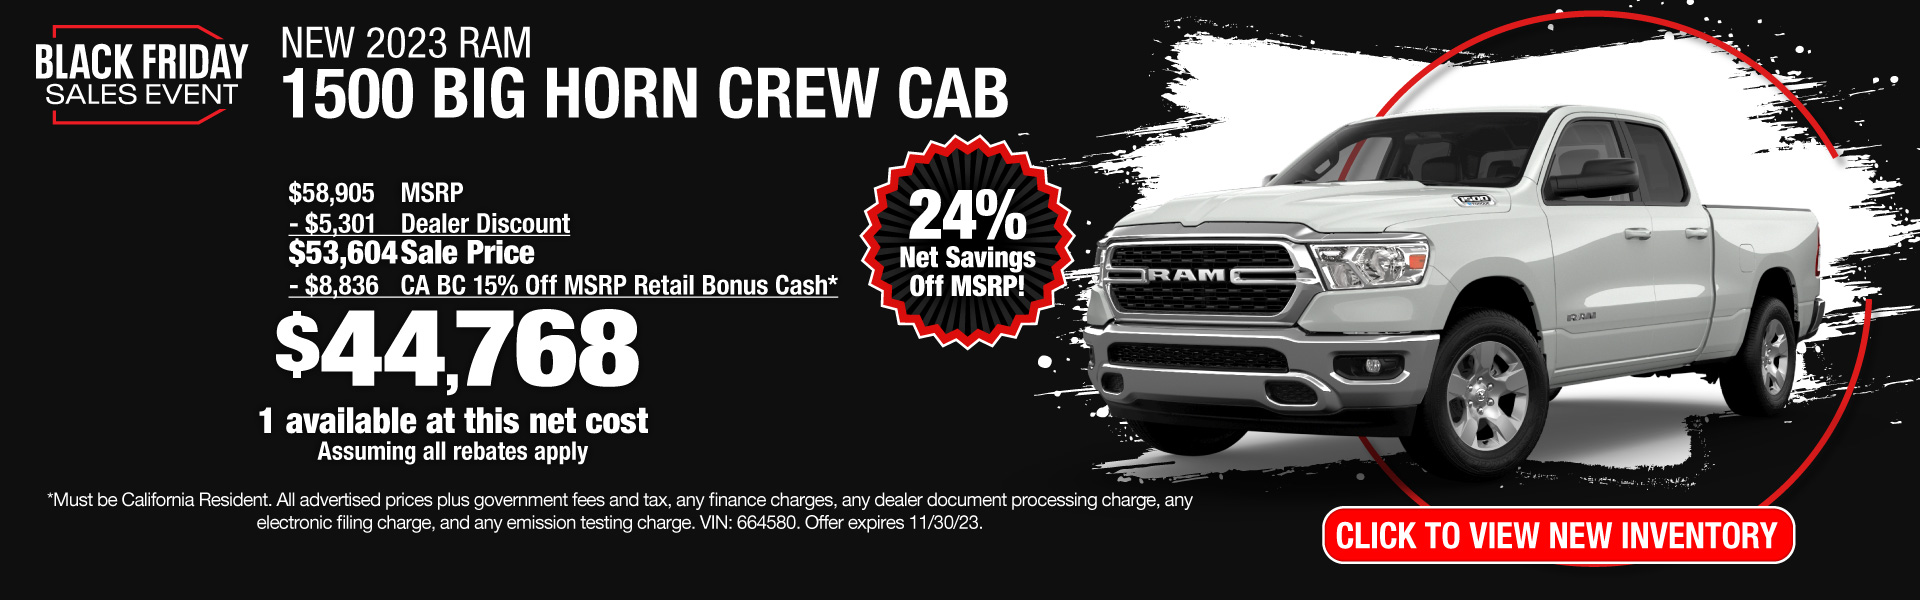 Get a New 2023 RAM 1500 Big Horn Crew Cab for 24% Net Savings Off MSRP! Offer expires 11/30/23.